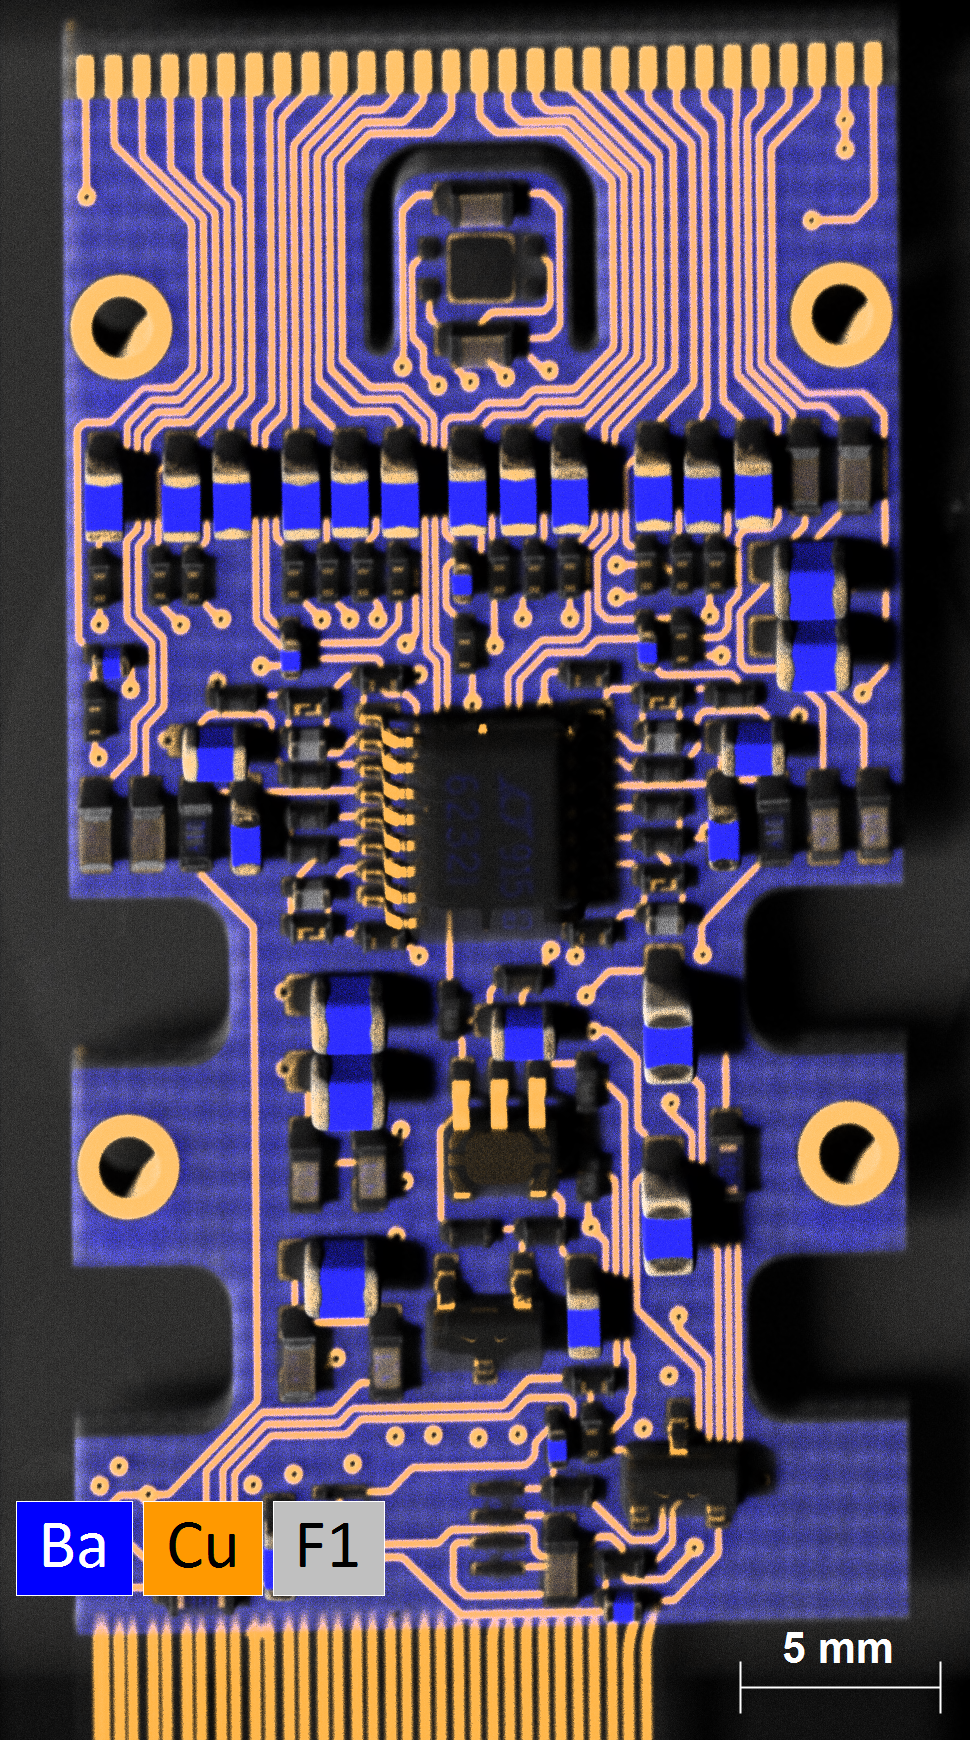 Large area map of a PCB electronic component highlighting the distribution of key elements over a topographically challenging surface.